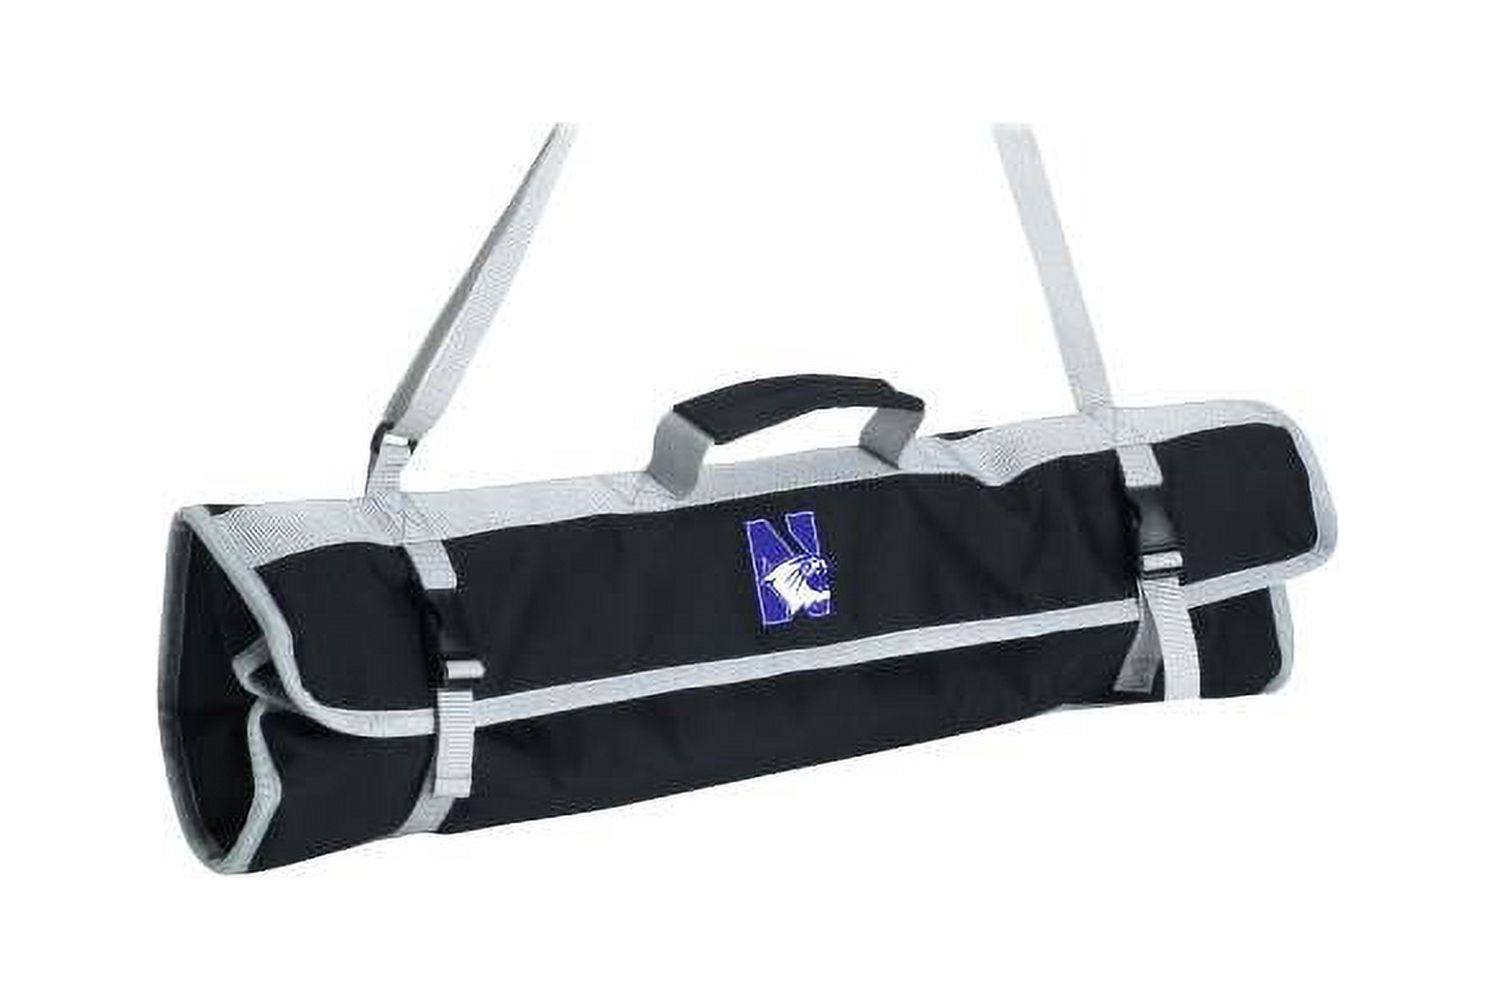 Northwestern Team Sports Wildcats 3 Piece BBQ Tool Set and Tote - image 1 of 2